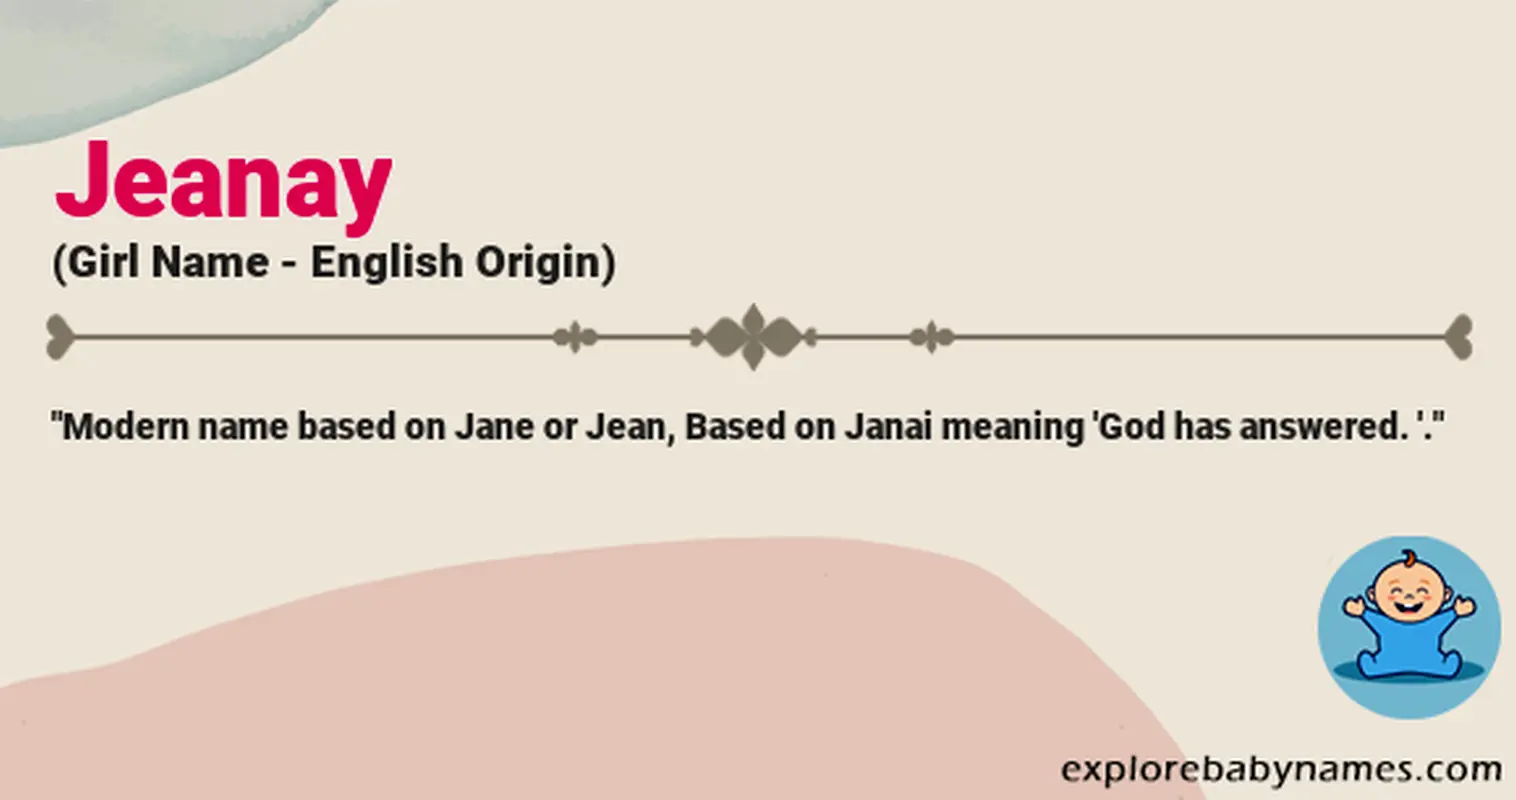 Meaning of Jeanay